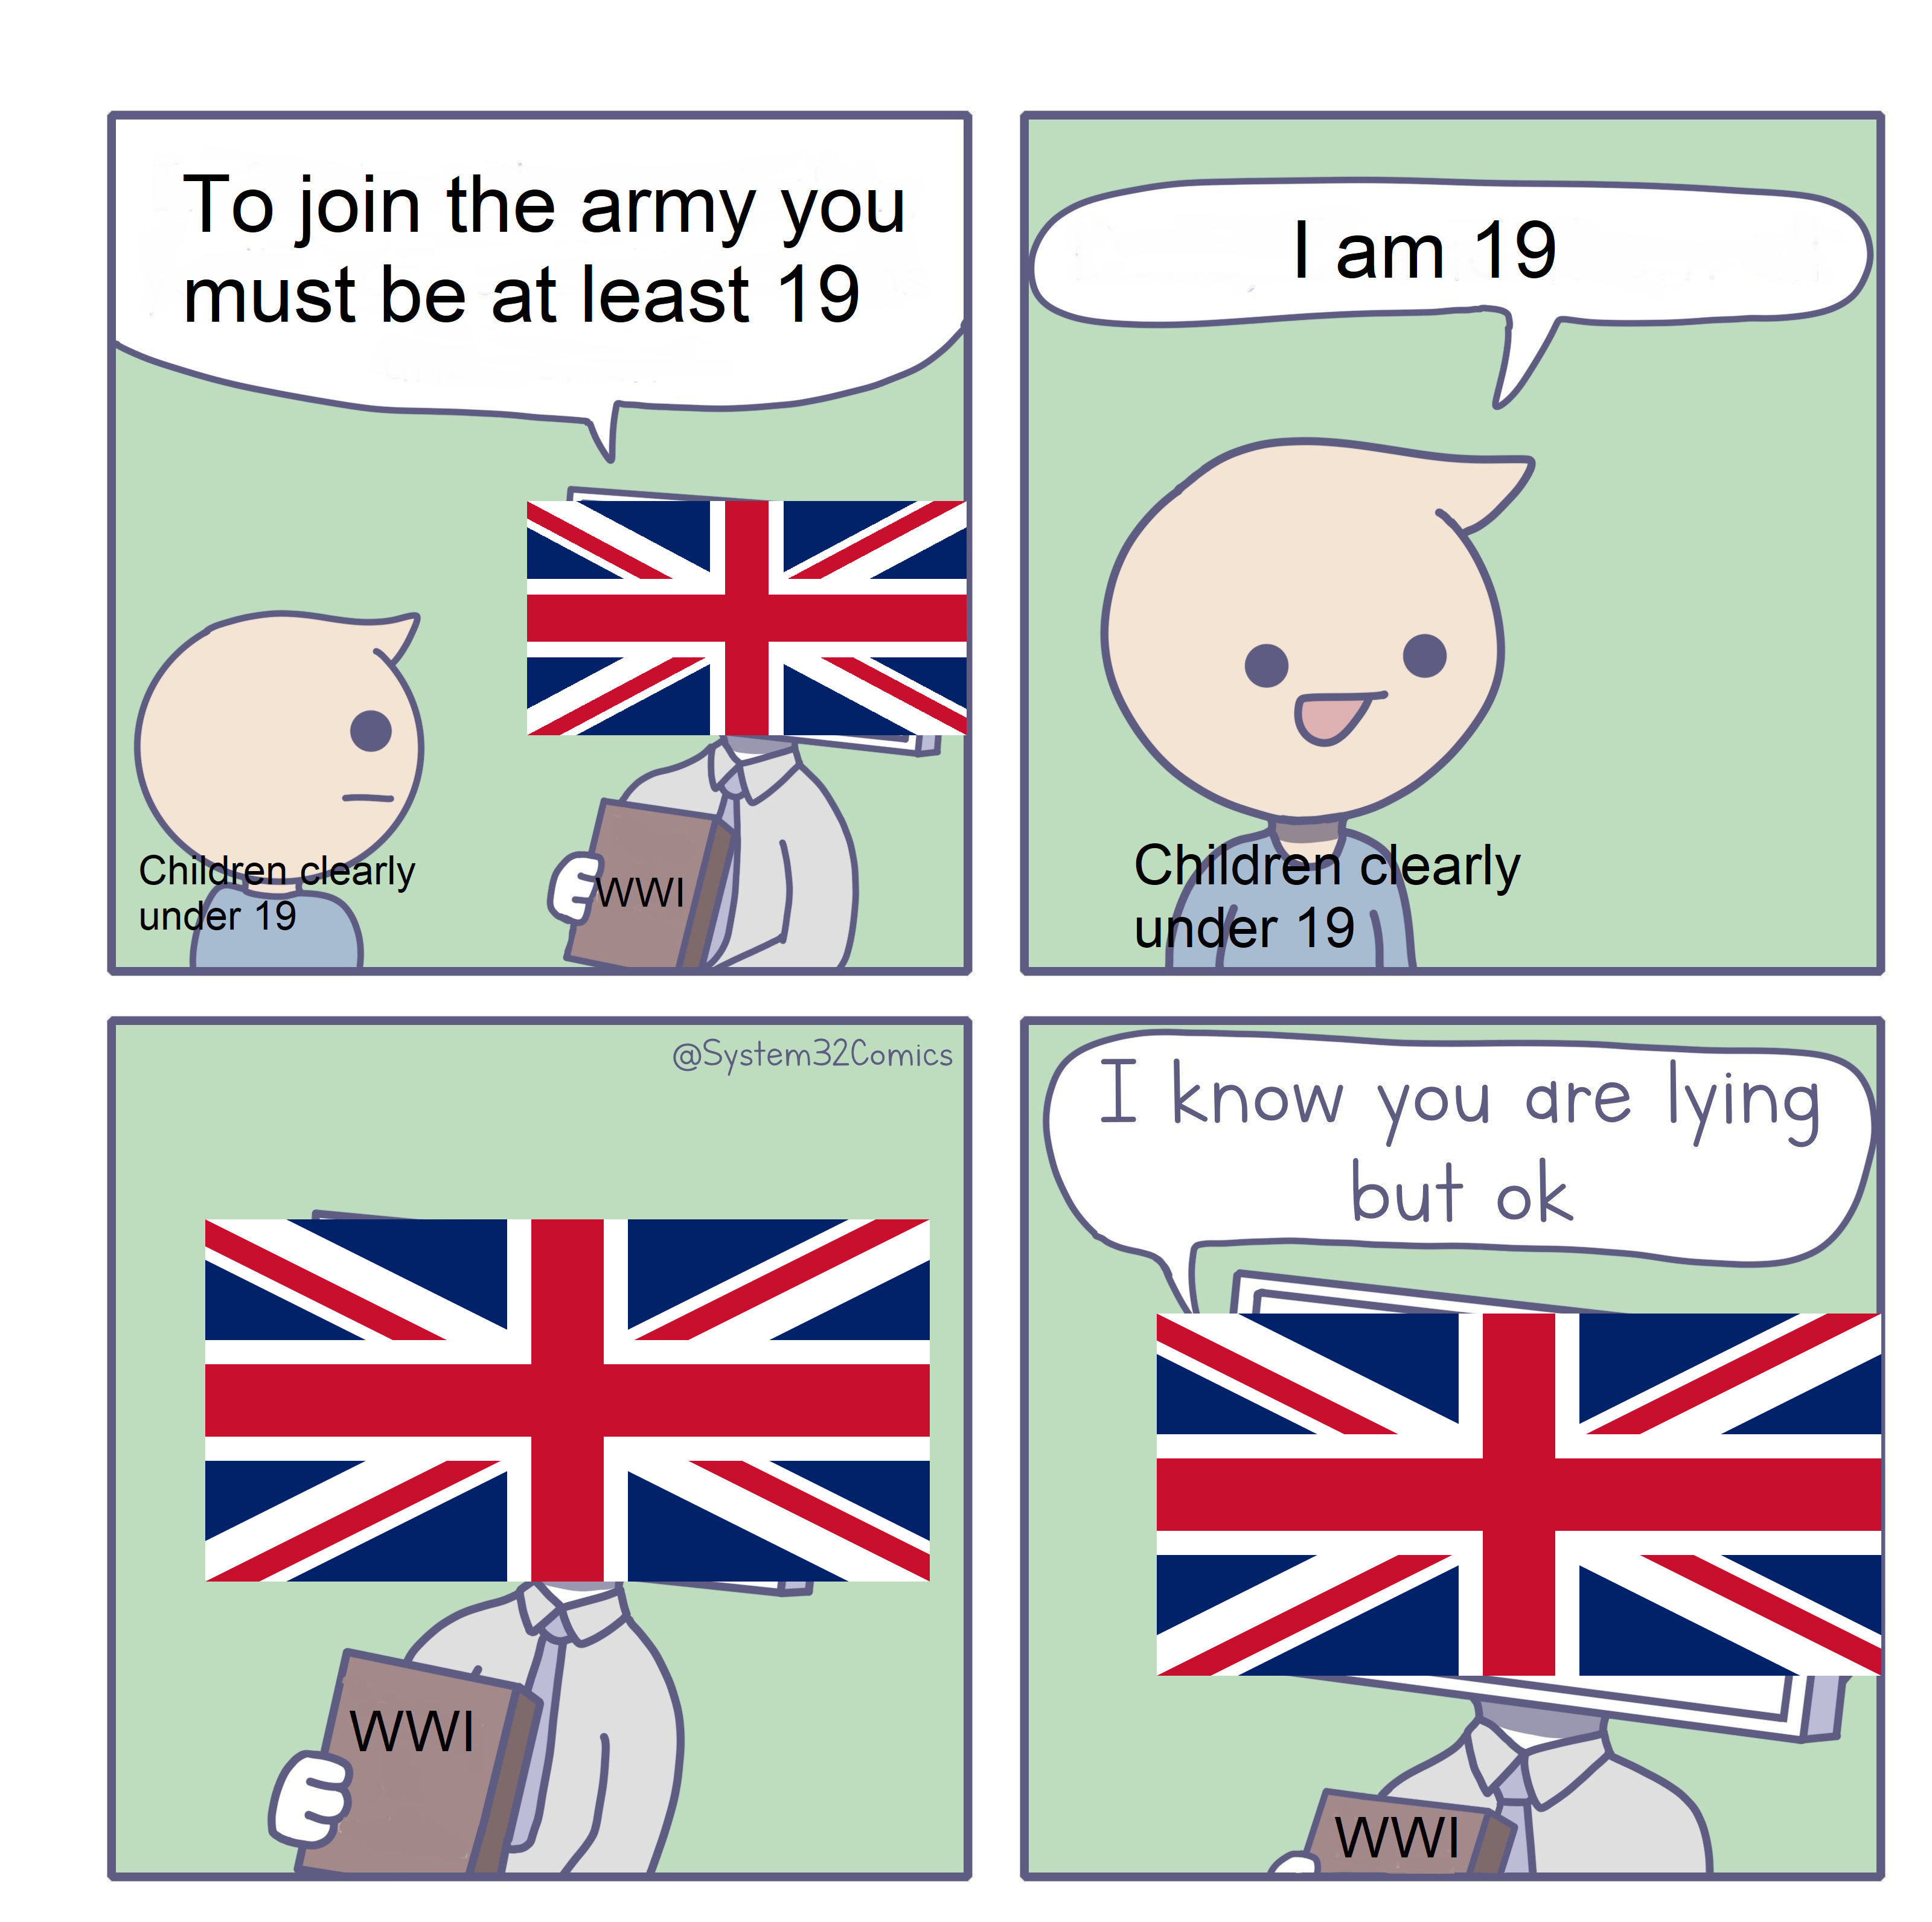 How To Join The Army As A Kid